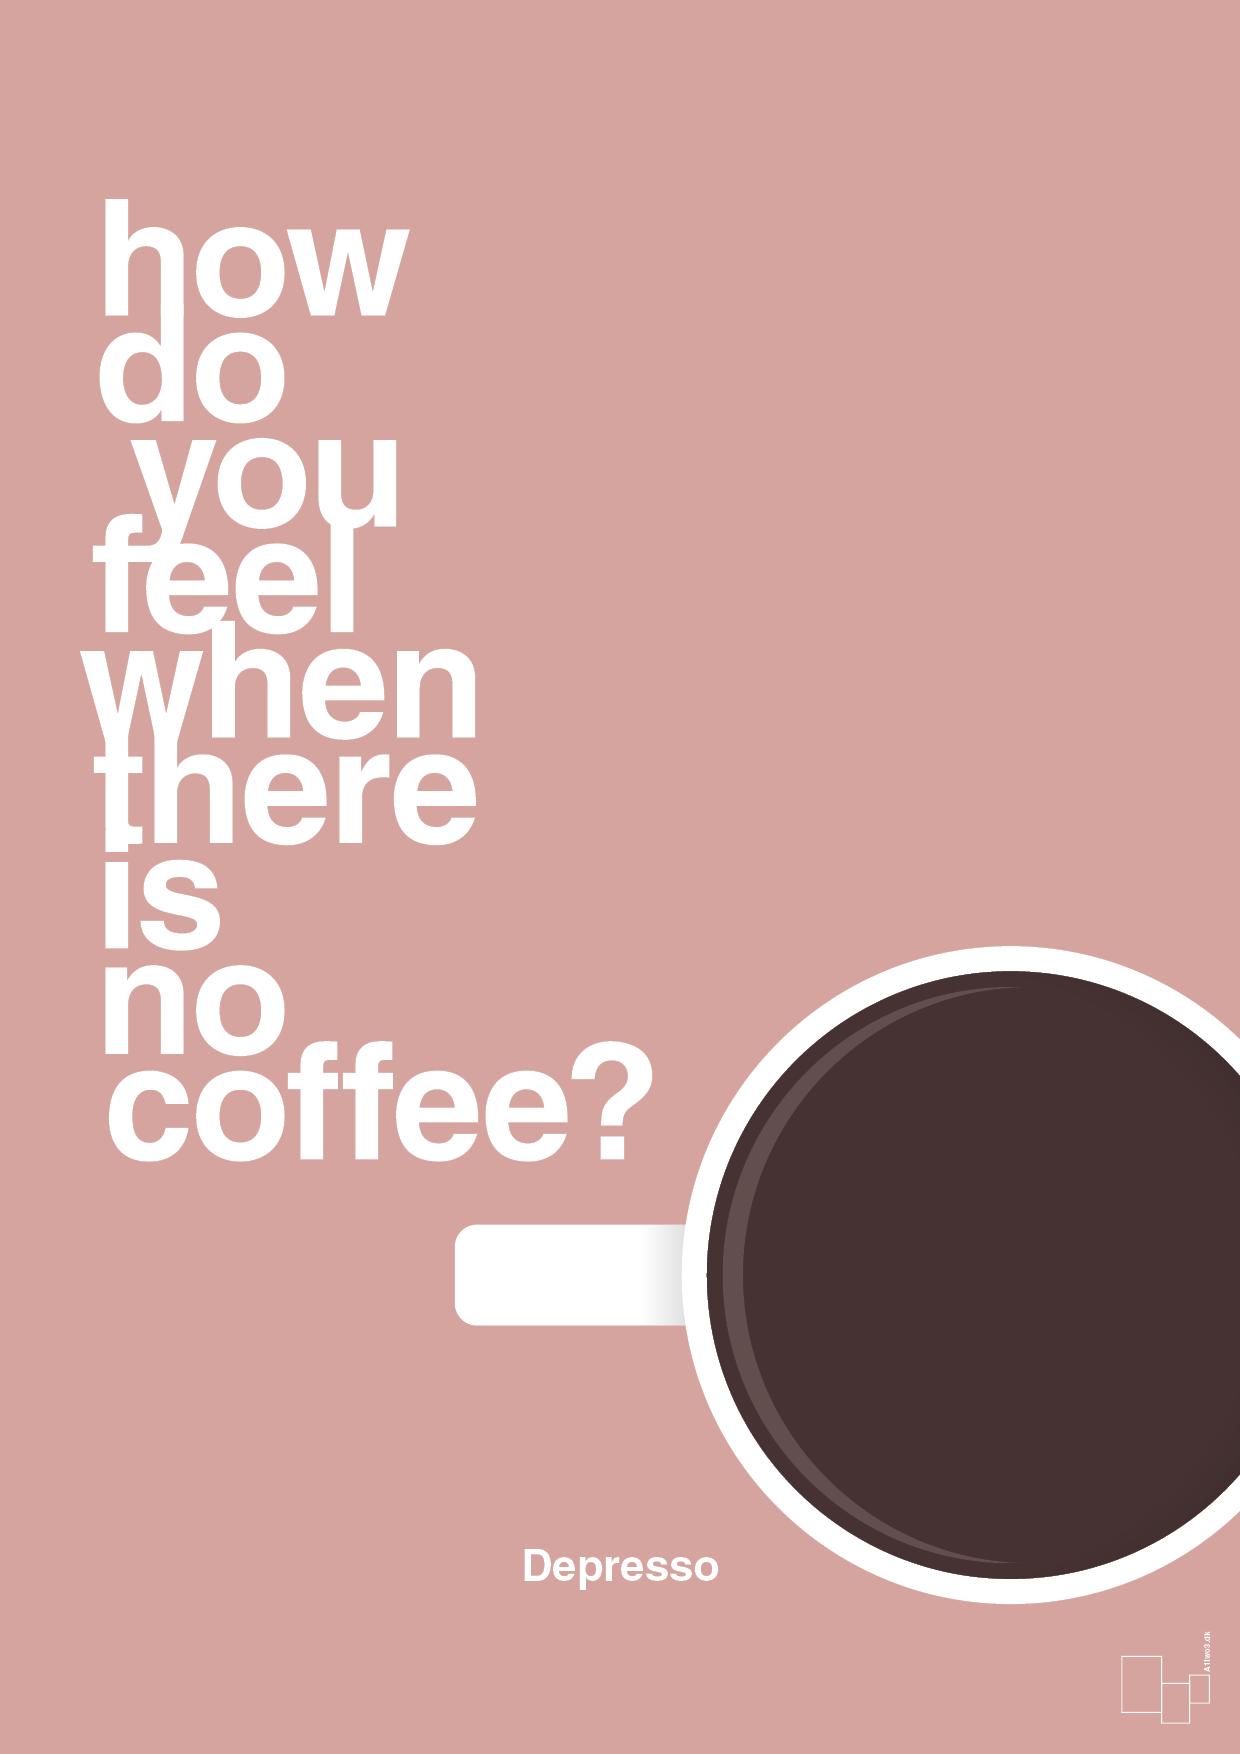 how do you feel when there is no coffee? depresso - Plakat med Mad & Drikke i Bubble Shell